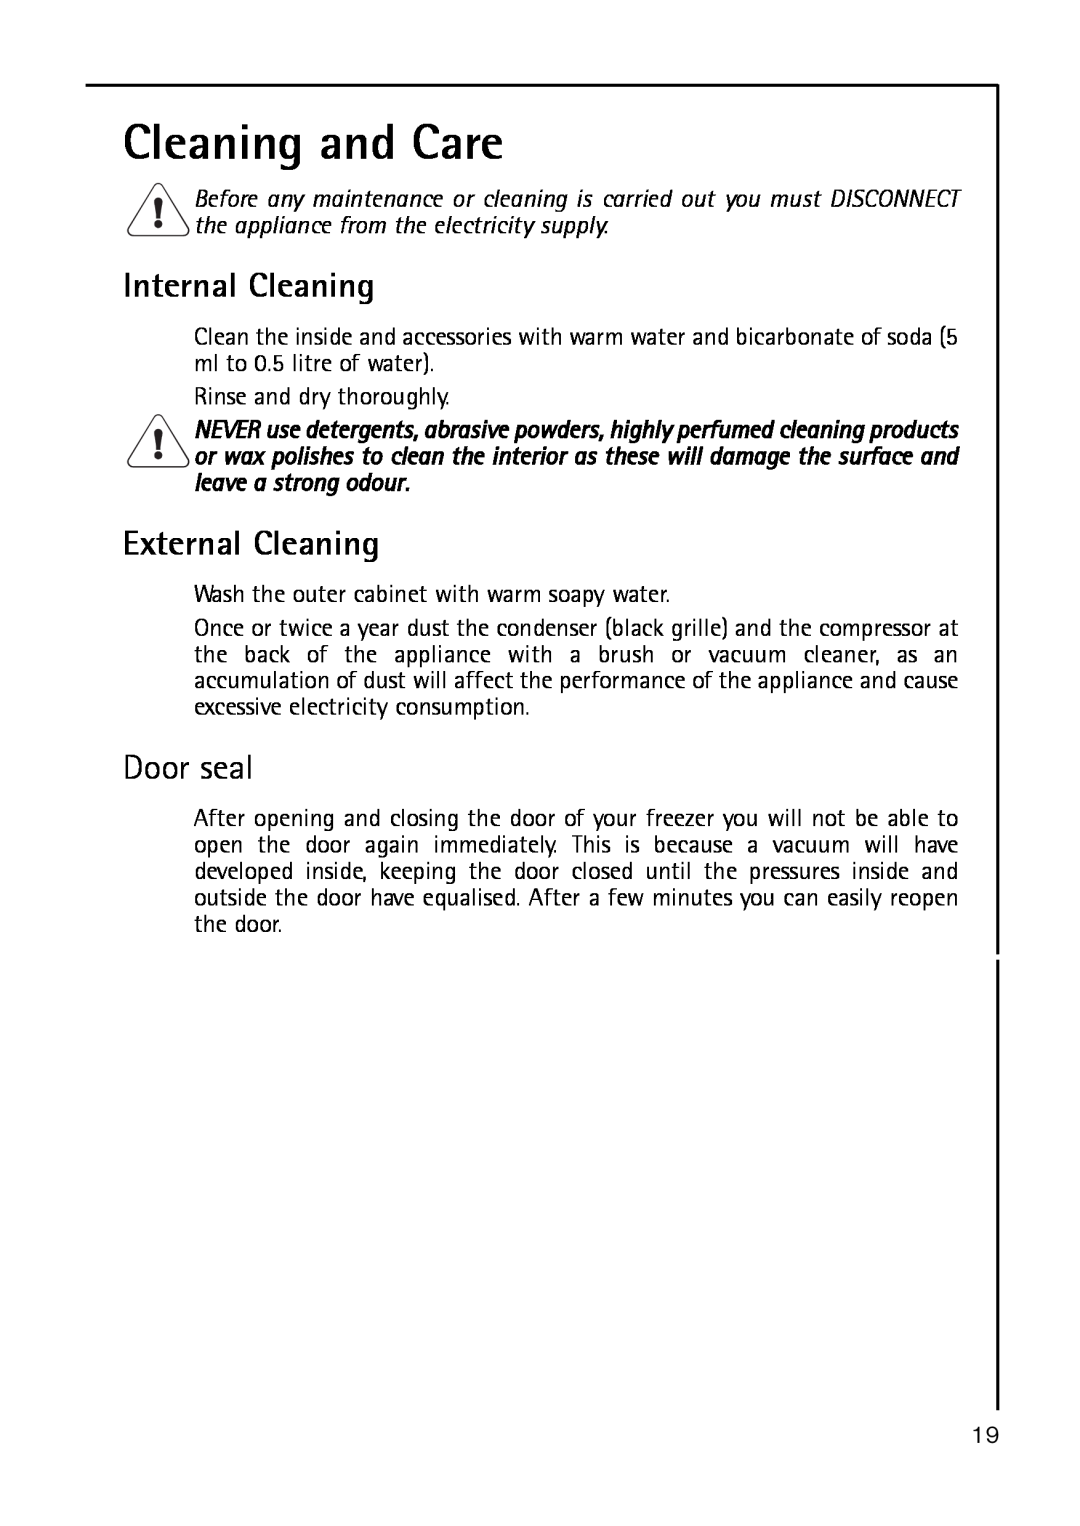 Electrolux A 40100 GS operating instructions Cleaning and Care, Internal Cleaning, External Cleaning, Door seal 